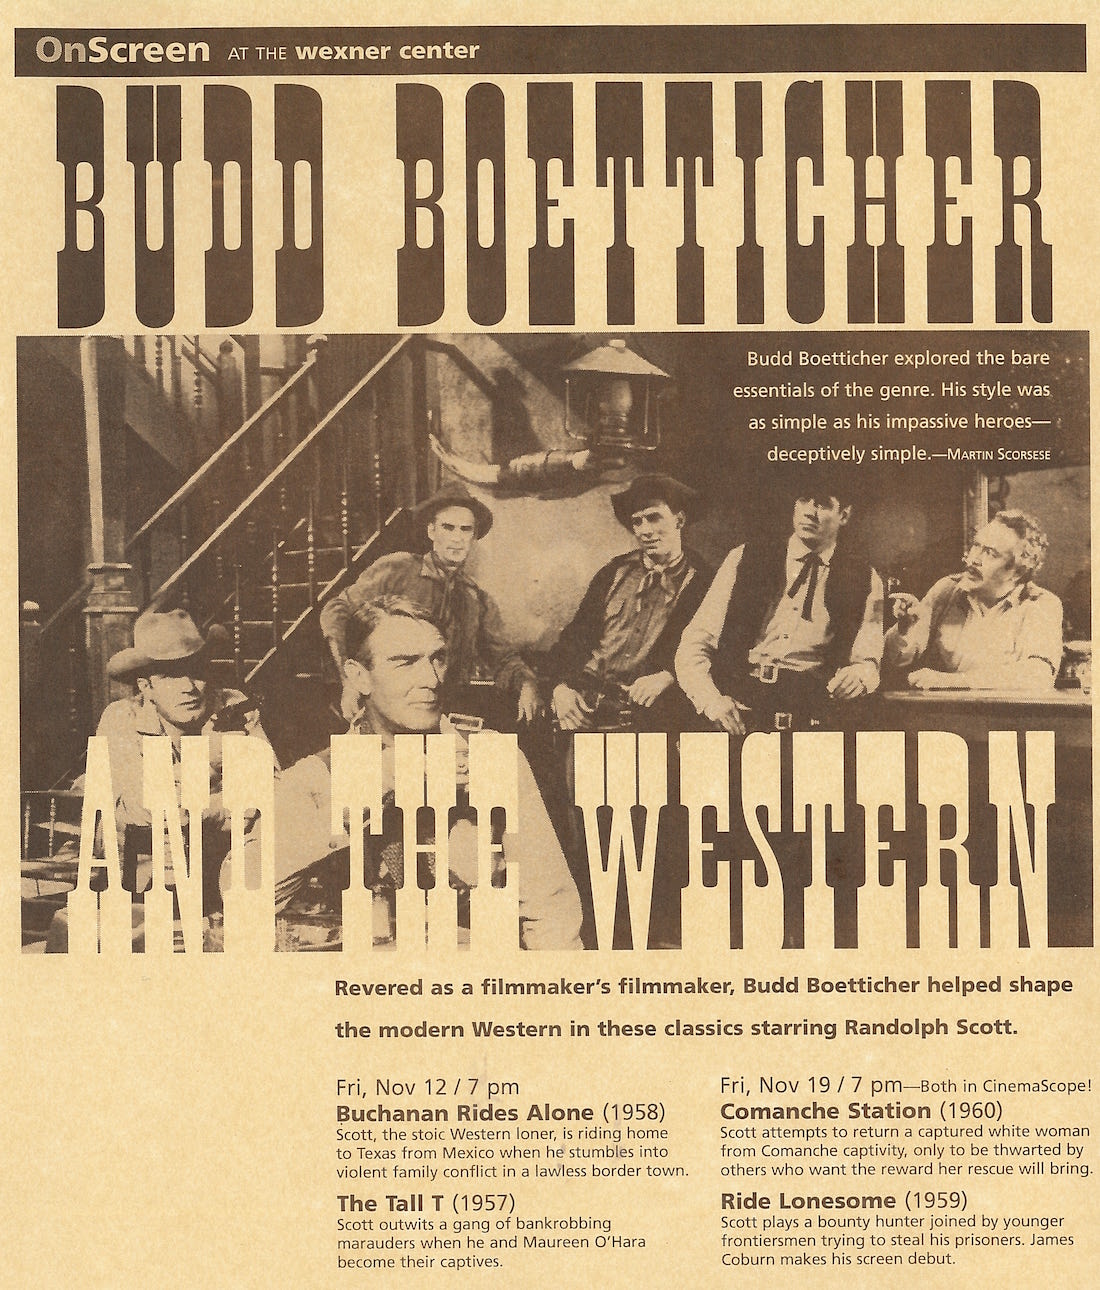 A promotional flier for a 1999 film series at the Wexner Center for the Arts on the Westerns of filmmaker Budd Boetticher